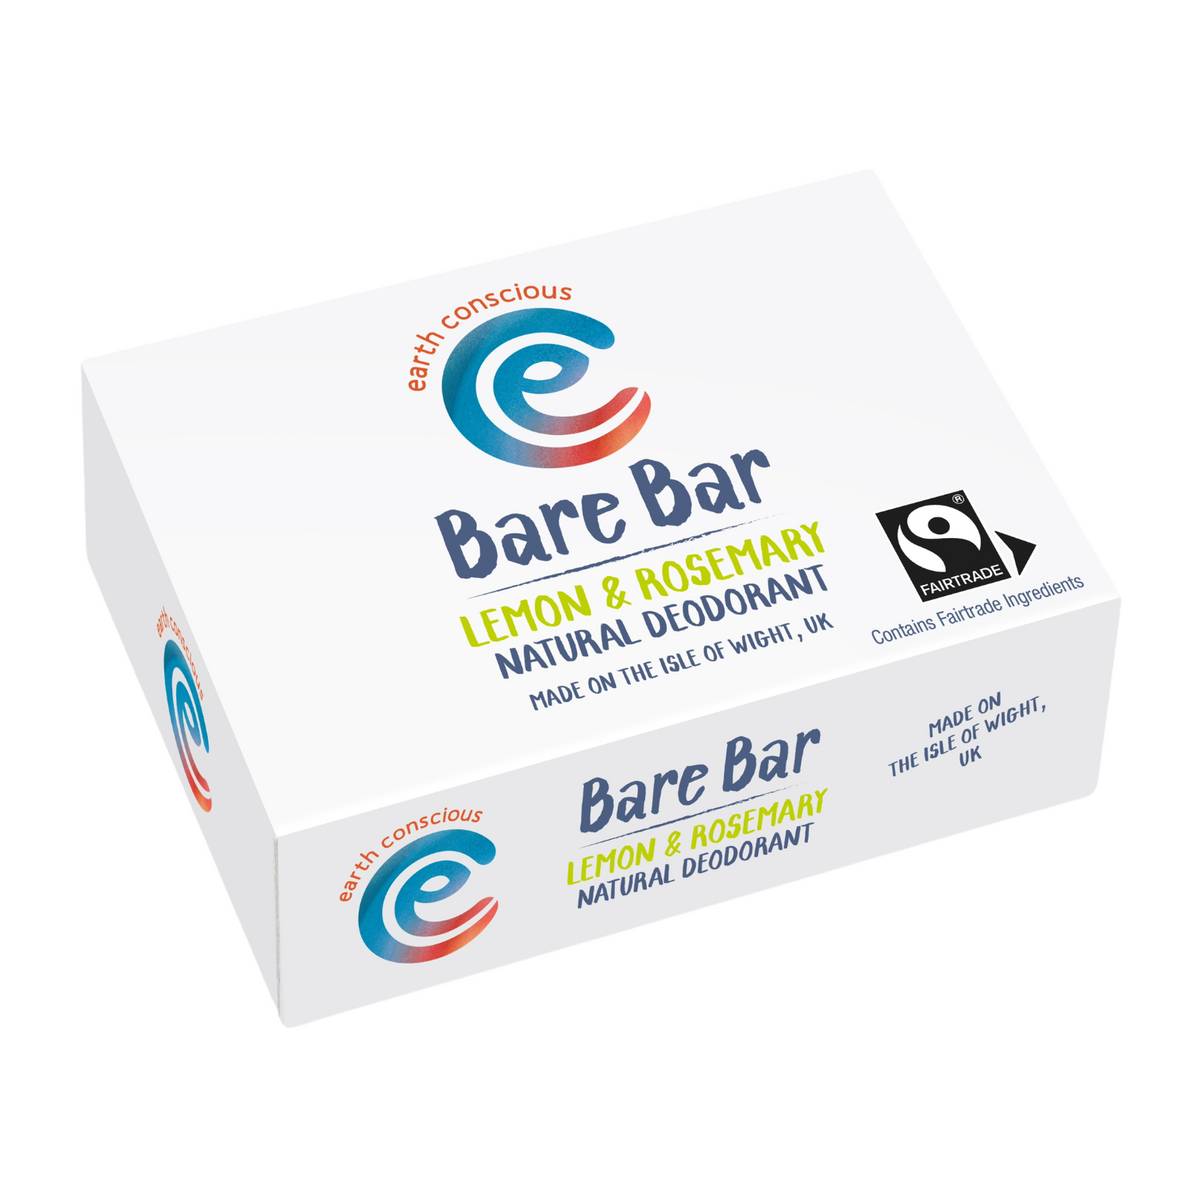 New Earth Conscious Solid Deodorant Lemon and Rosemary bare bar